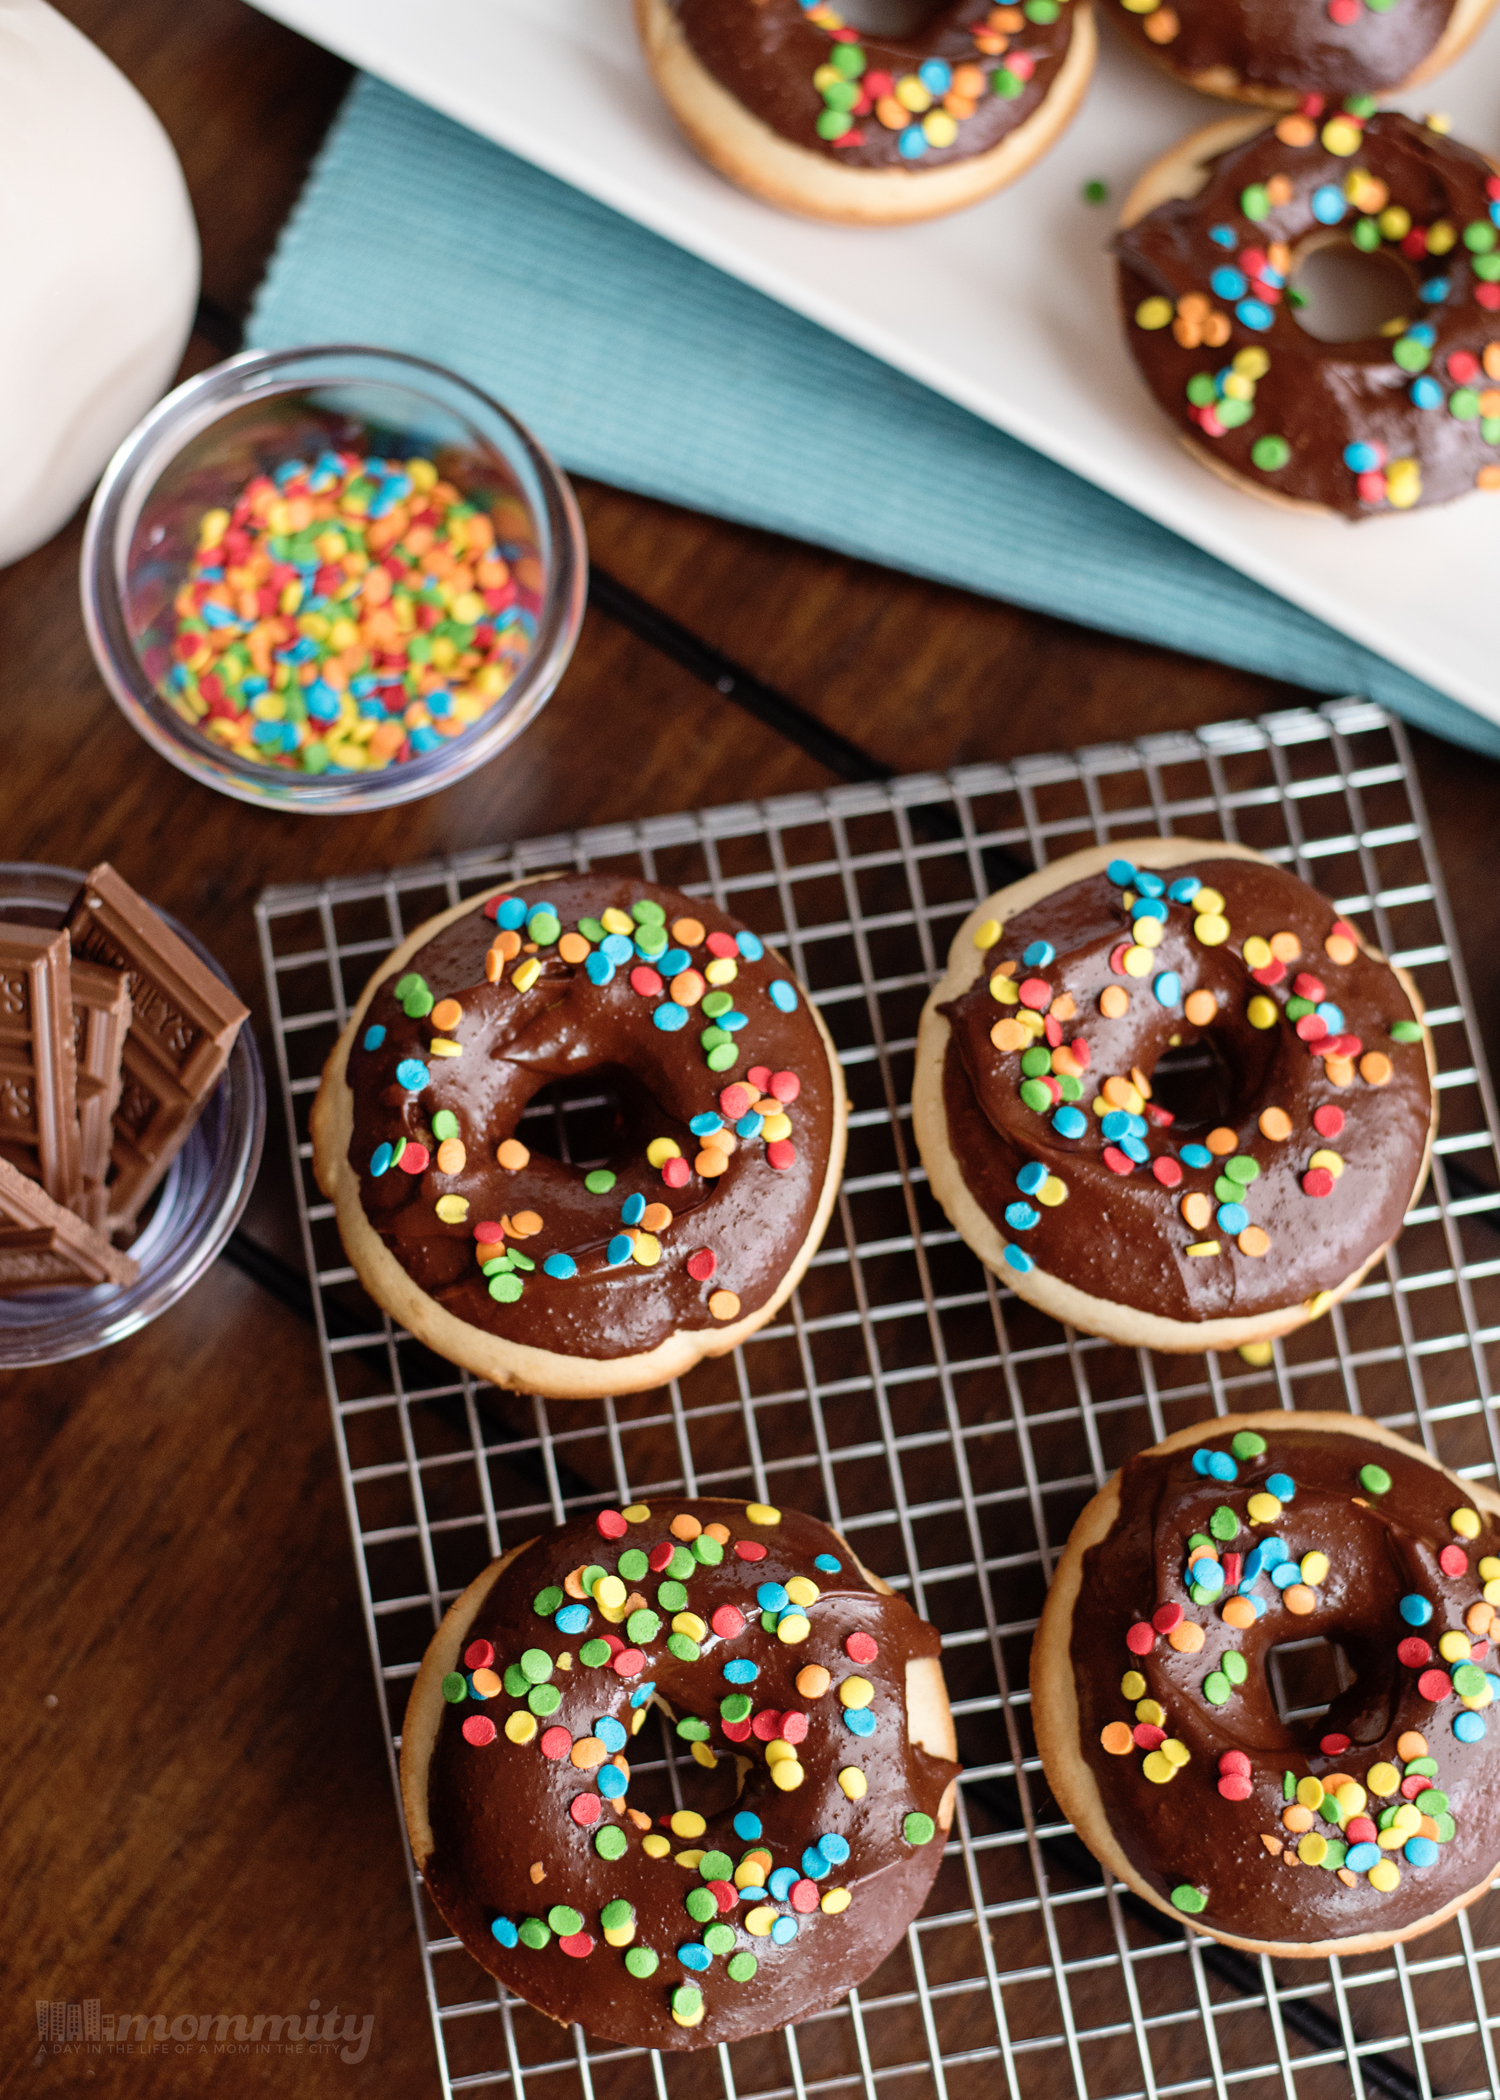 Beautifully Baked Donuts with a Chocolate Frosting Glaze and Sprinkles